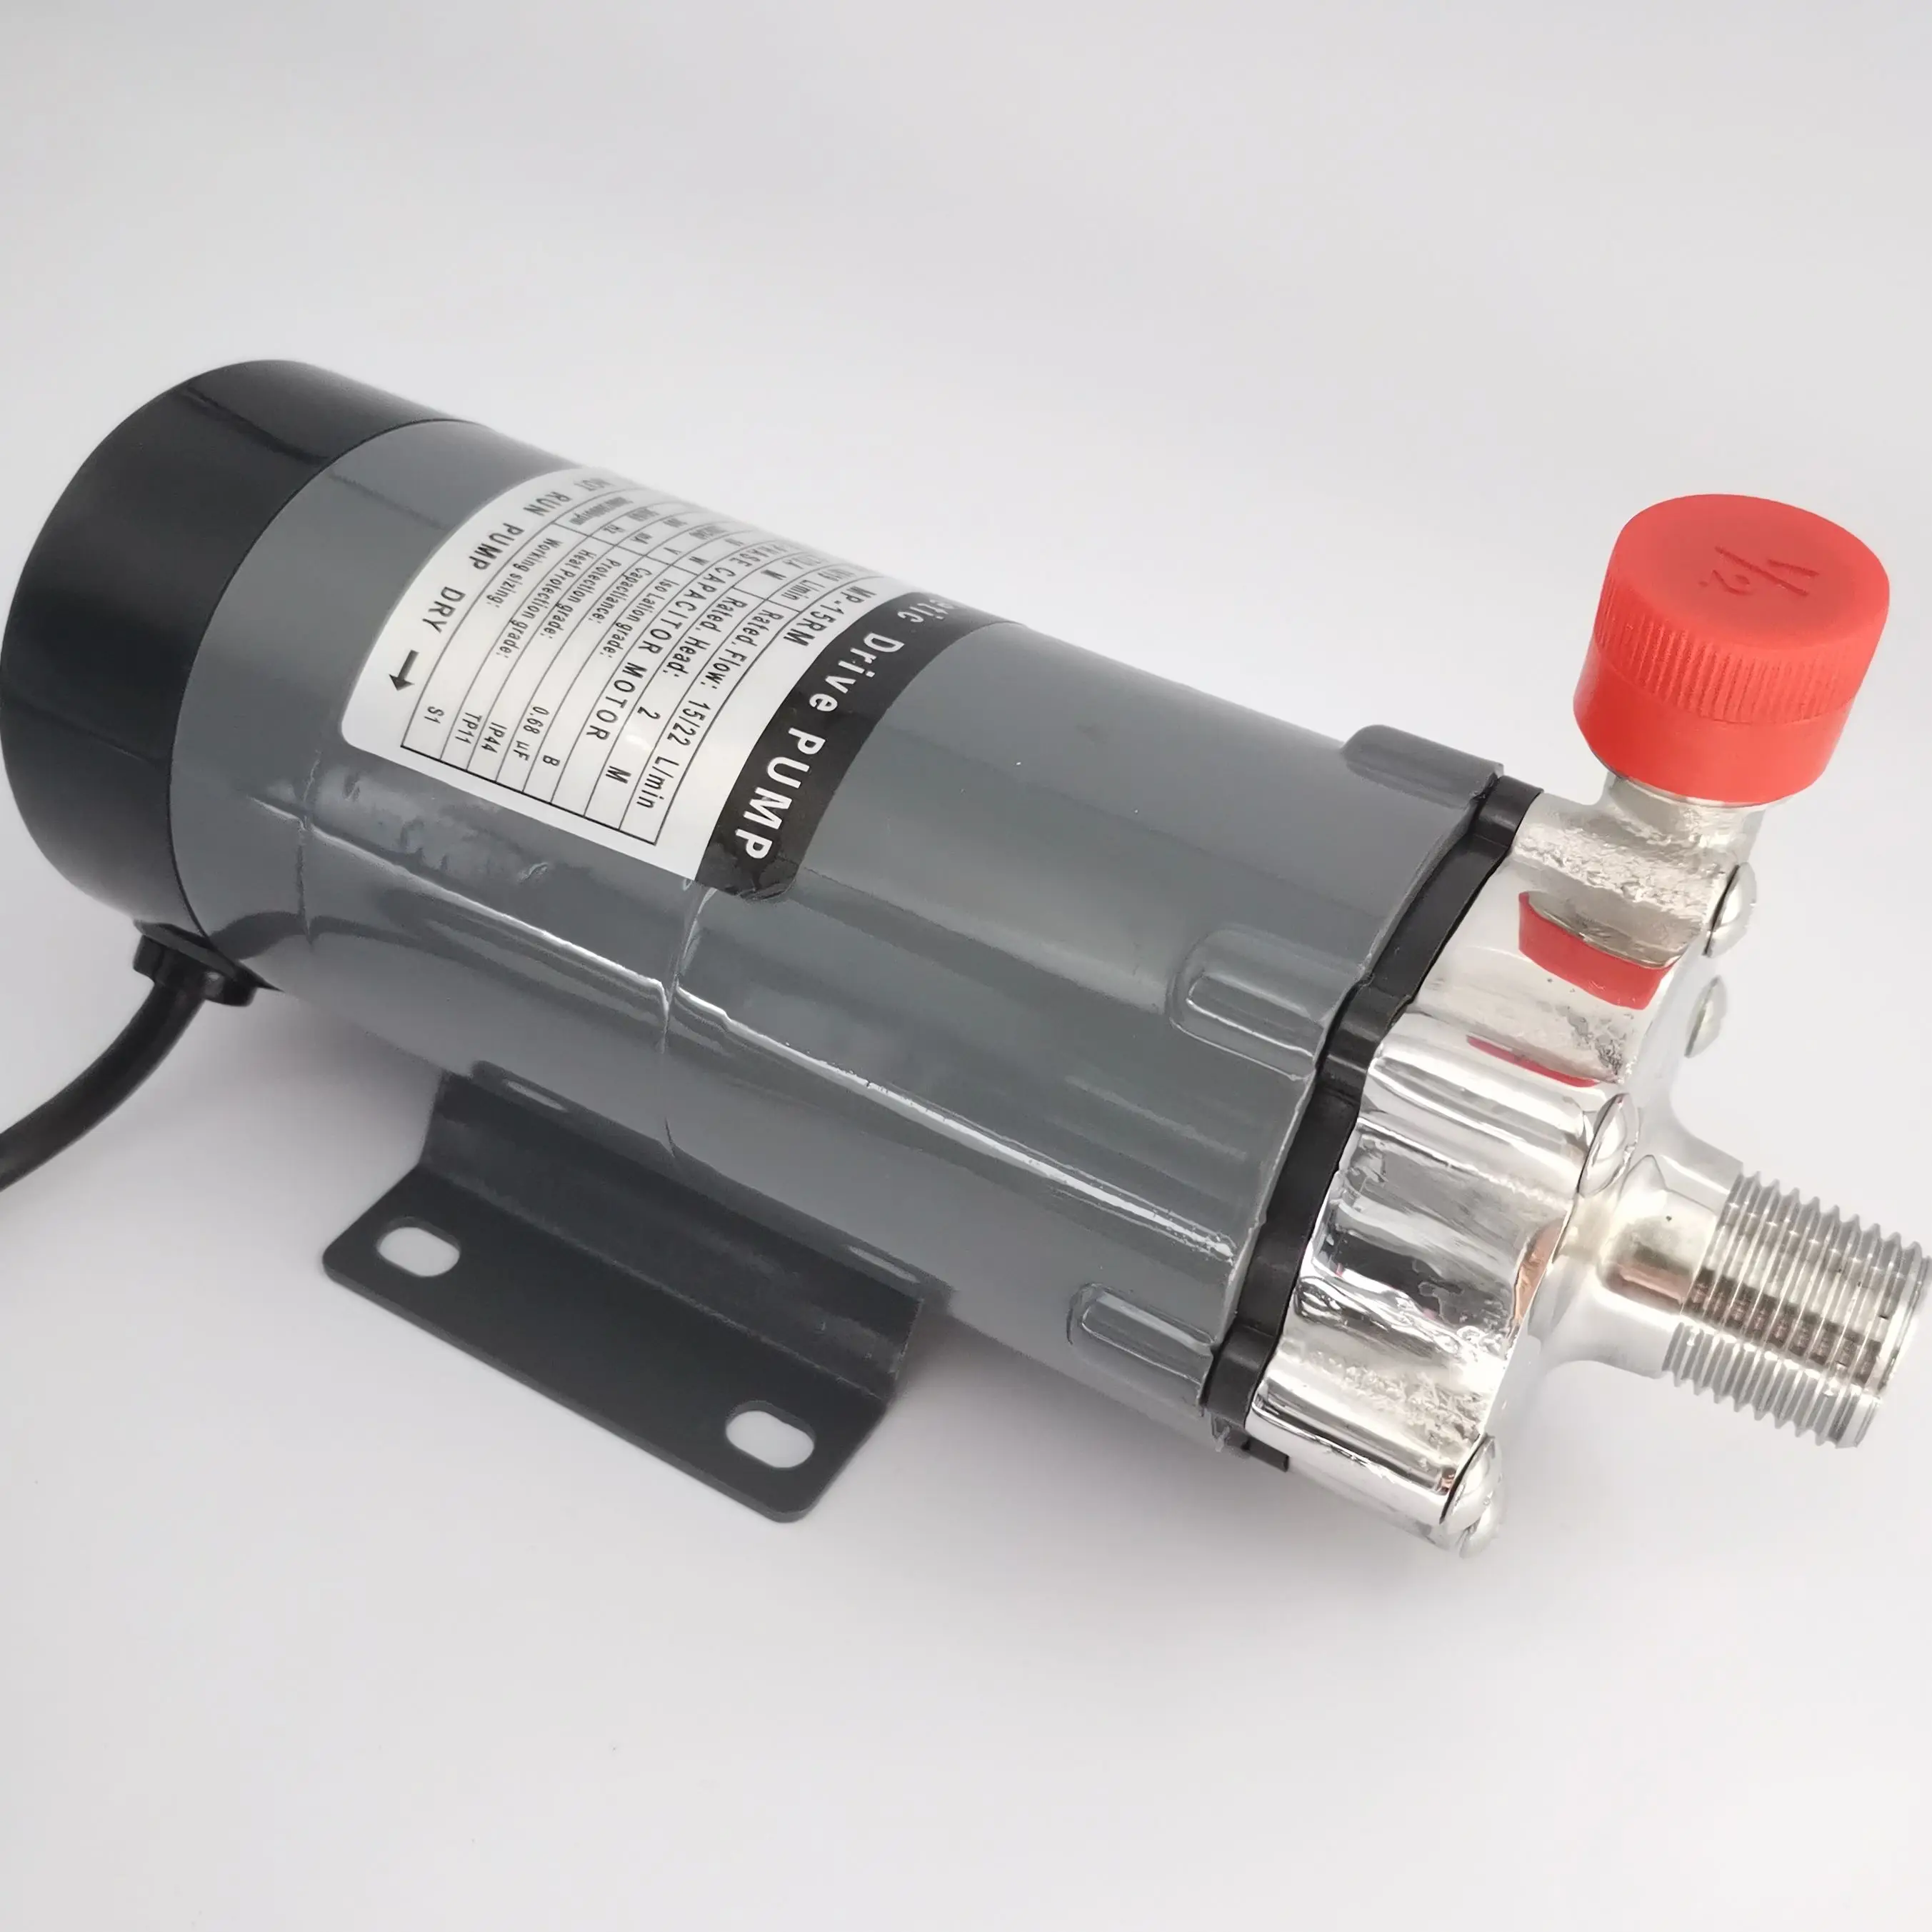 110V 10W Magnetic Drive Circulation Pump for Water Food Grade Industrial Pump 